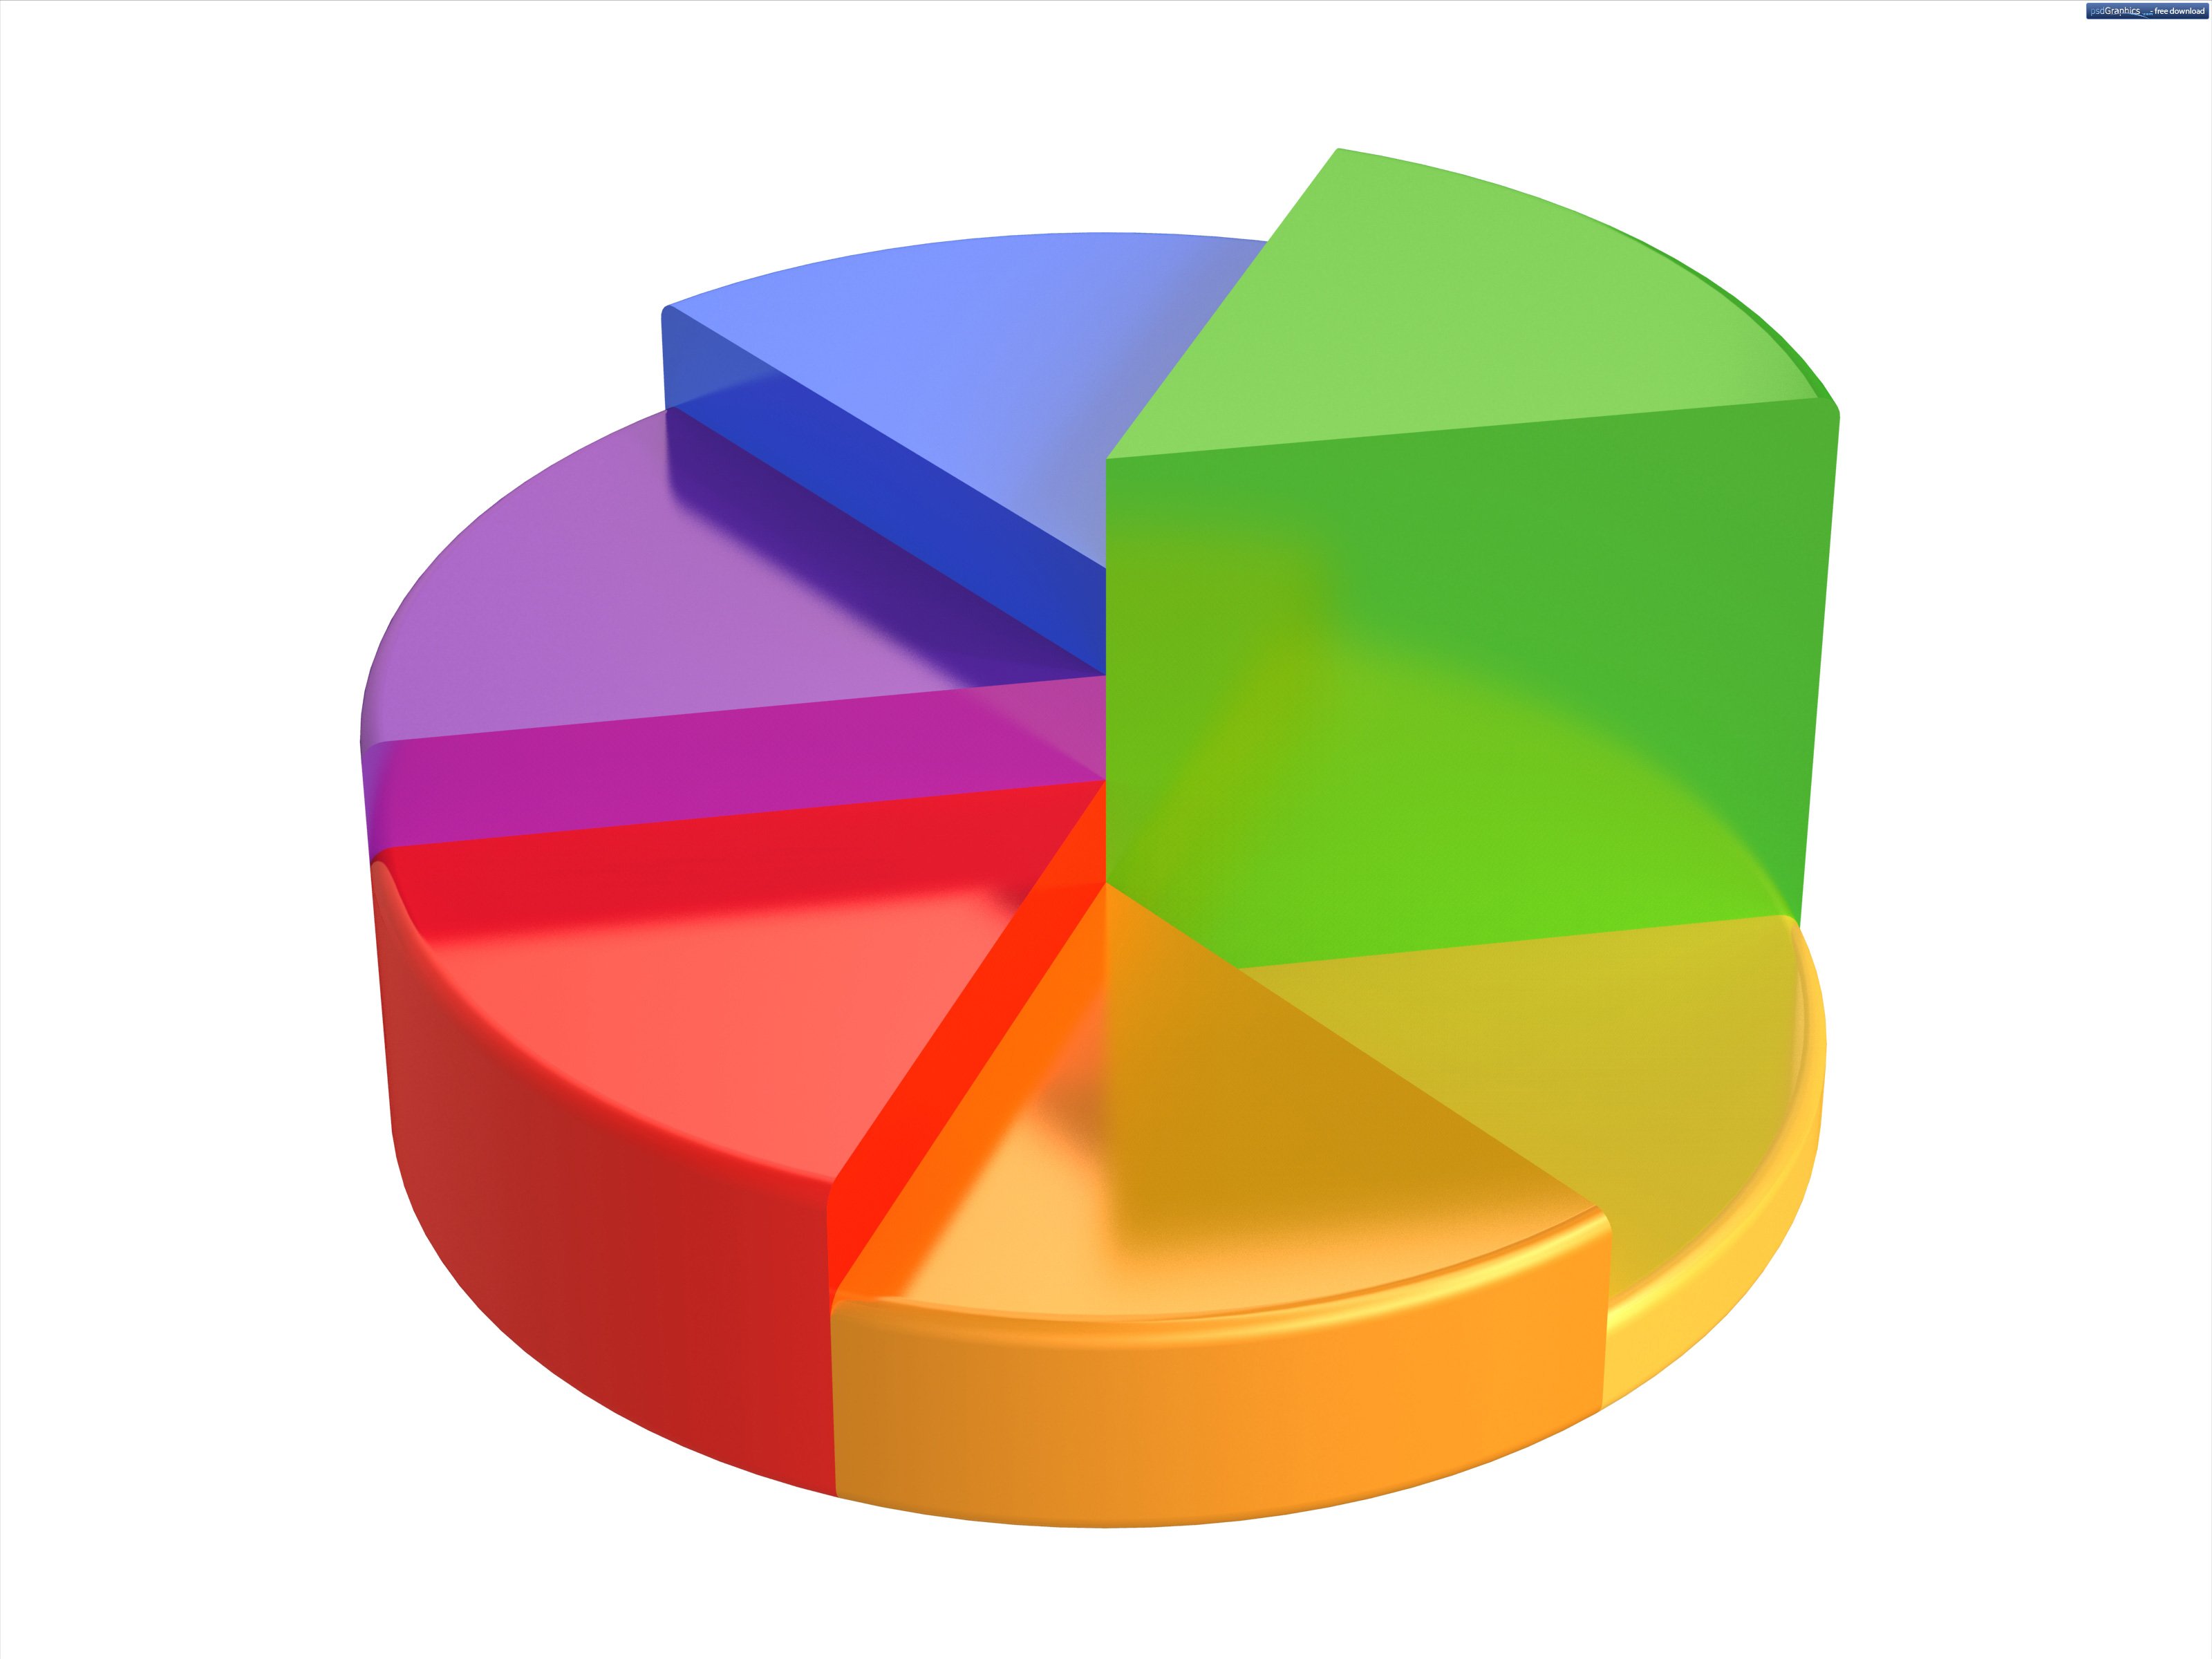 How To Create A Pie Chart In Powerpoint